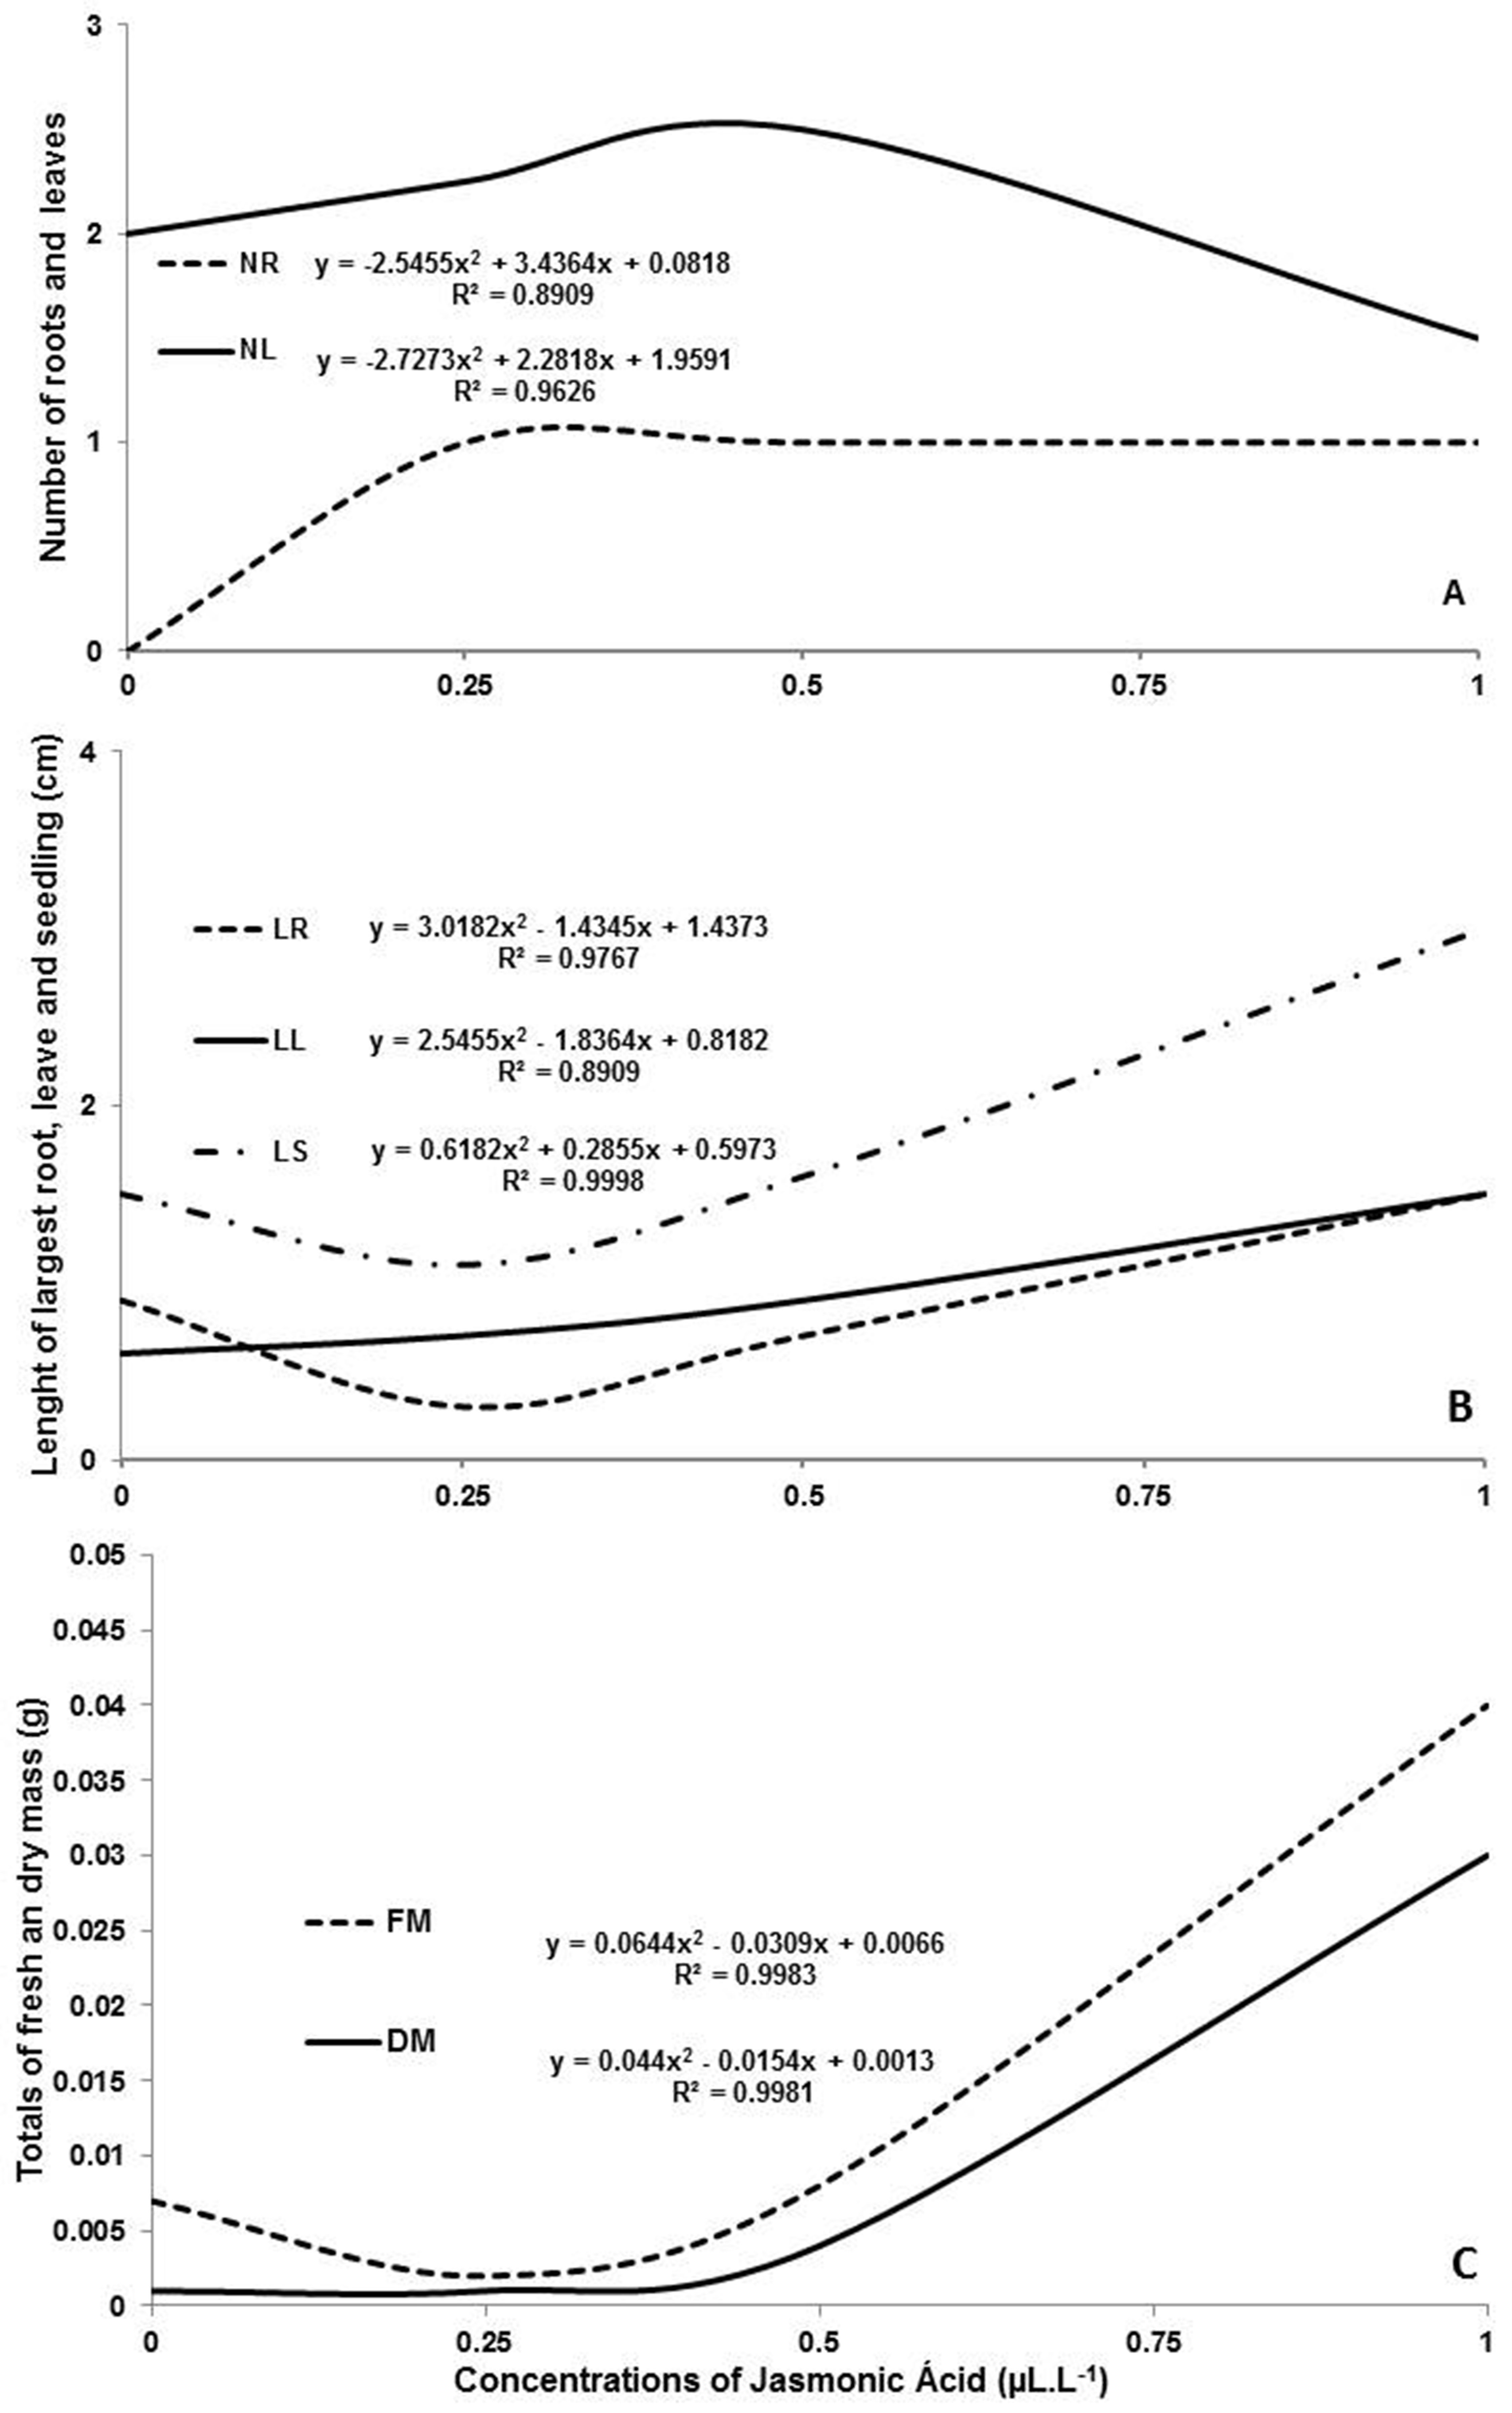 Fig. 1. Polynomial correlation of biometric variables of Catasetum fimbriatum seedlings: NR – number of roots; NL – number of leaves, LR – length of largest root; LL – length of largest leaf; LS – total length of seedlings; FM – fresh mass; DM – dry mass.